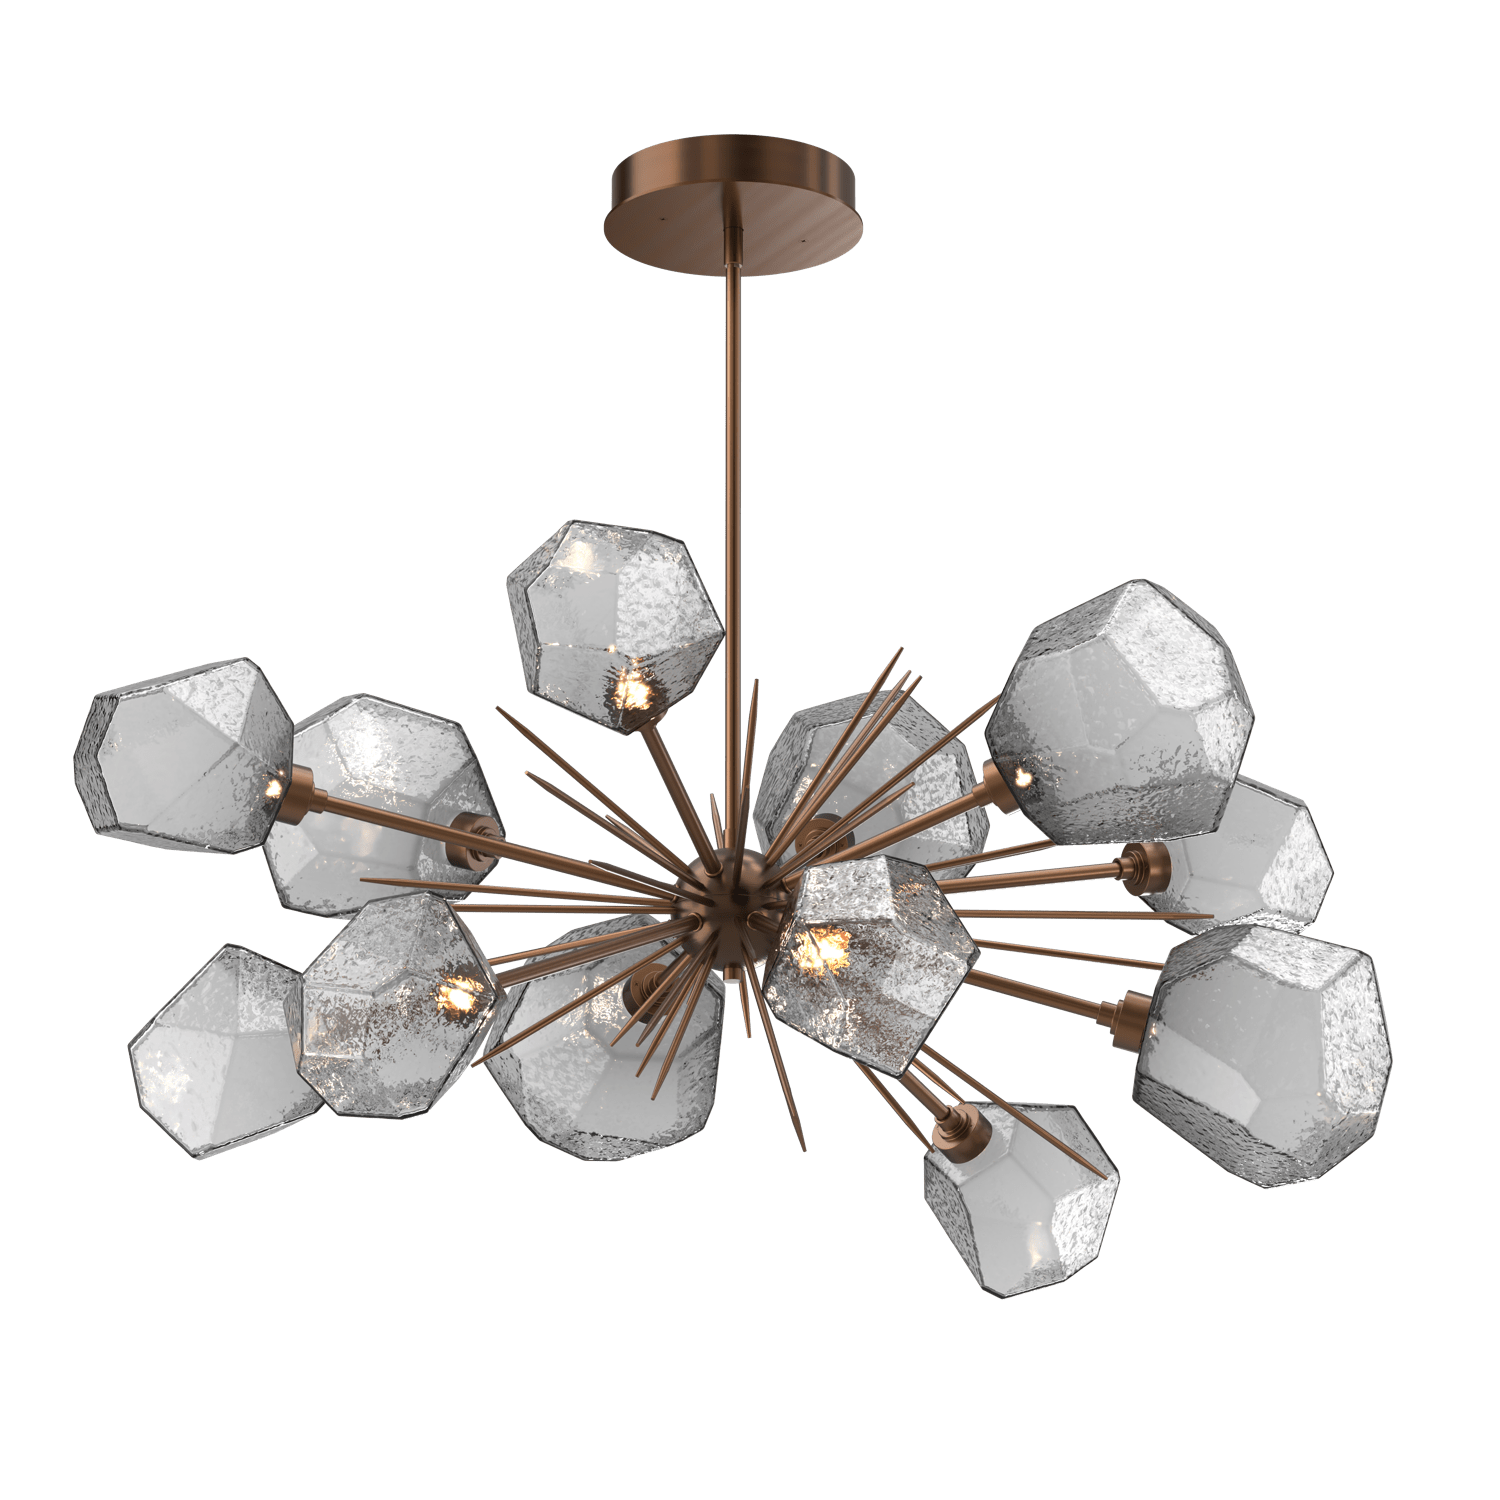 PLB0039-0D-RB-S-Hammerton-Studio-Gem-43-inch-oval-starburst-chandelier-with-oil-rubbed-bronze-finish-and-smoke-blown-glass-shades-and-LED-lamping